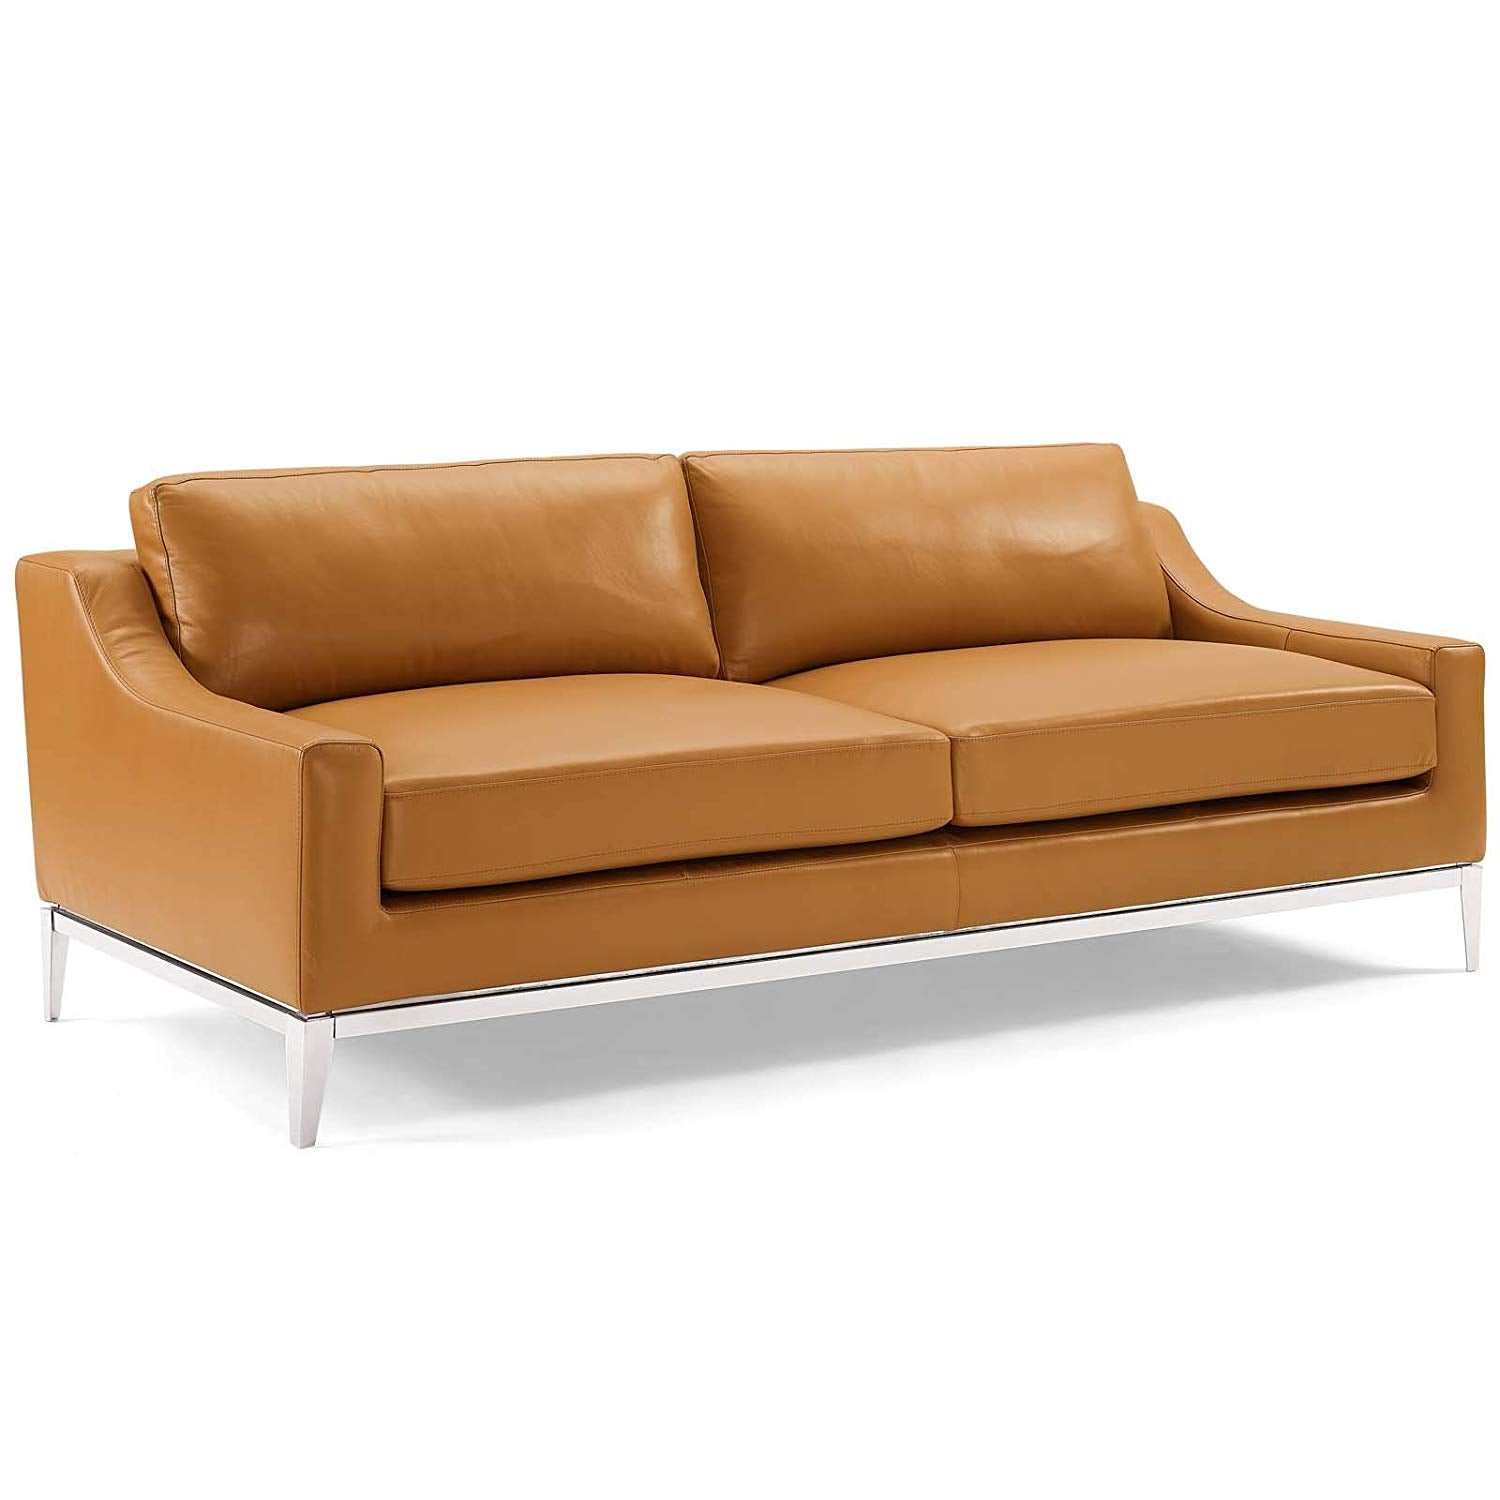 Upholstered 83.5" Stainless Steel Base Leather Sofa - living-essentials